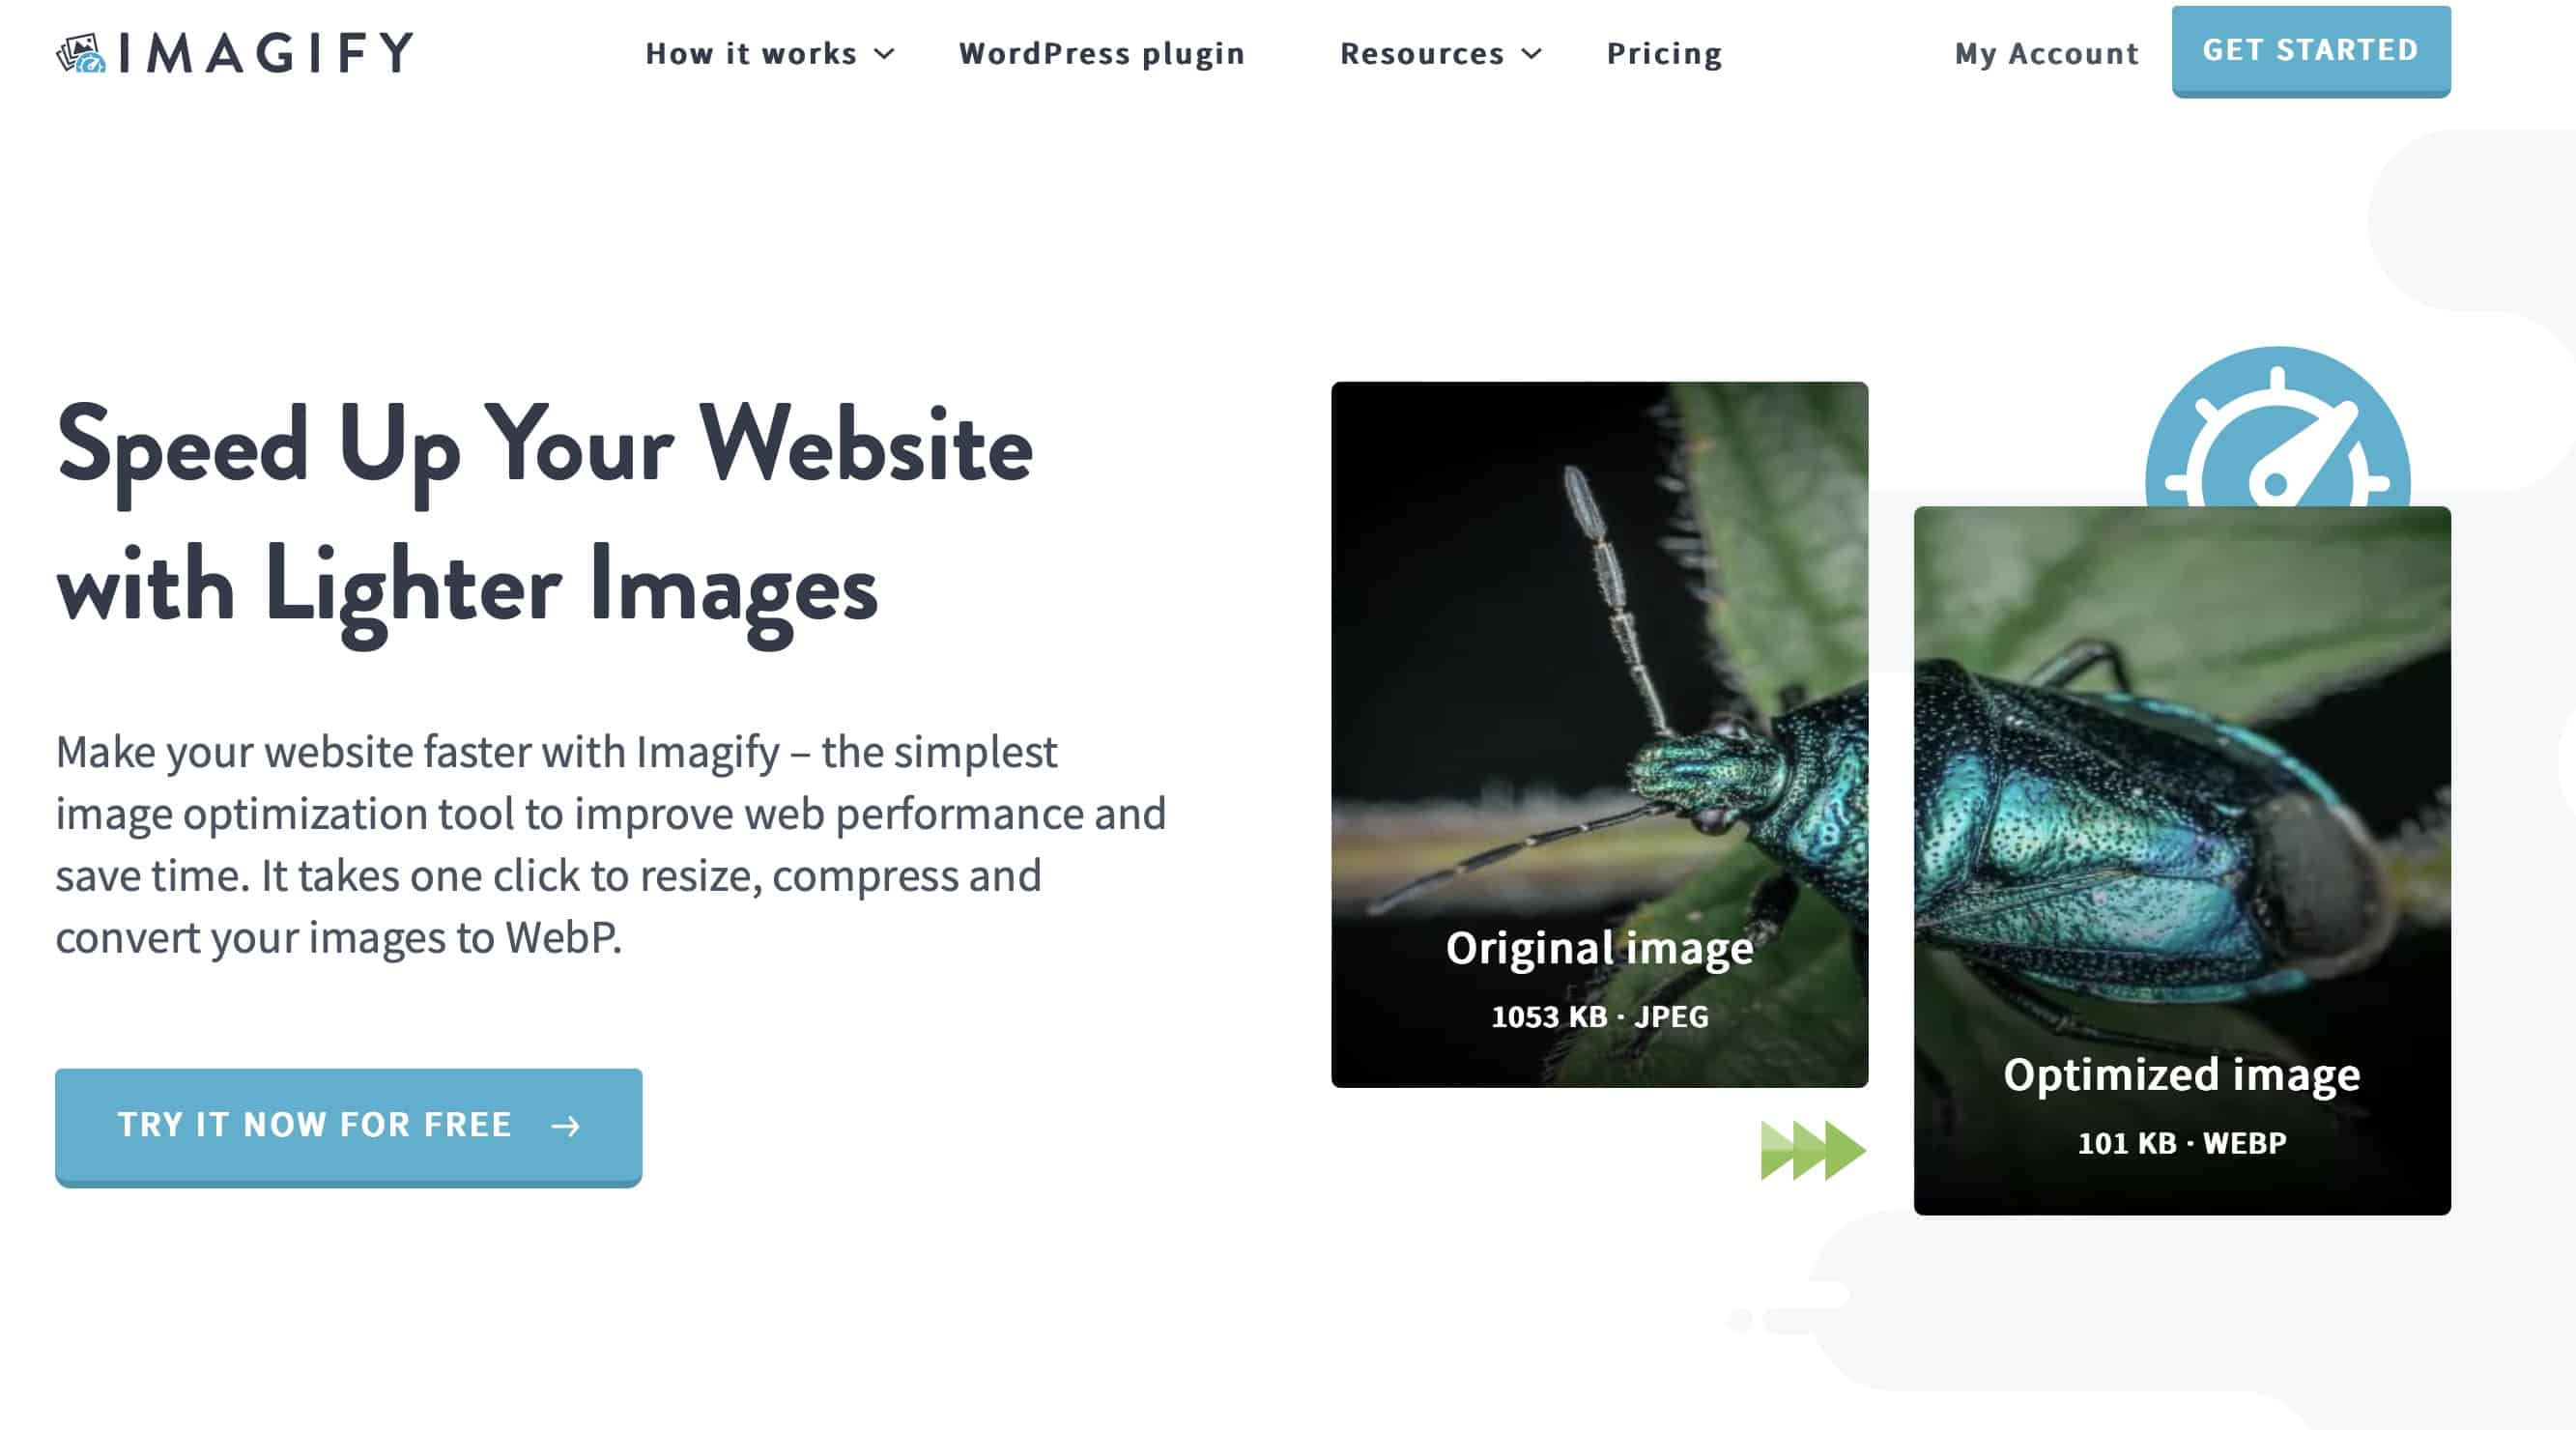 Featured image for “Imagify: A WordPress Plugin Worth Exploring”